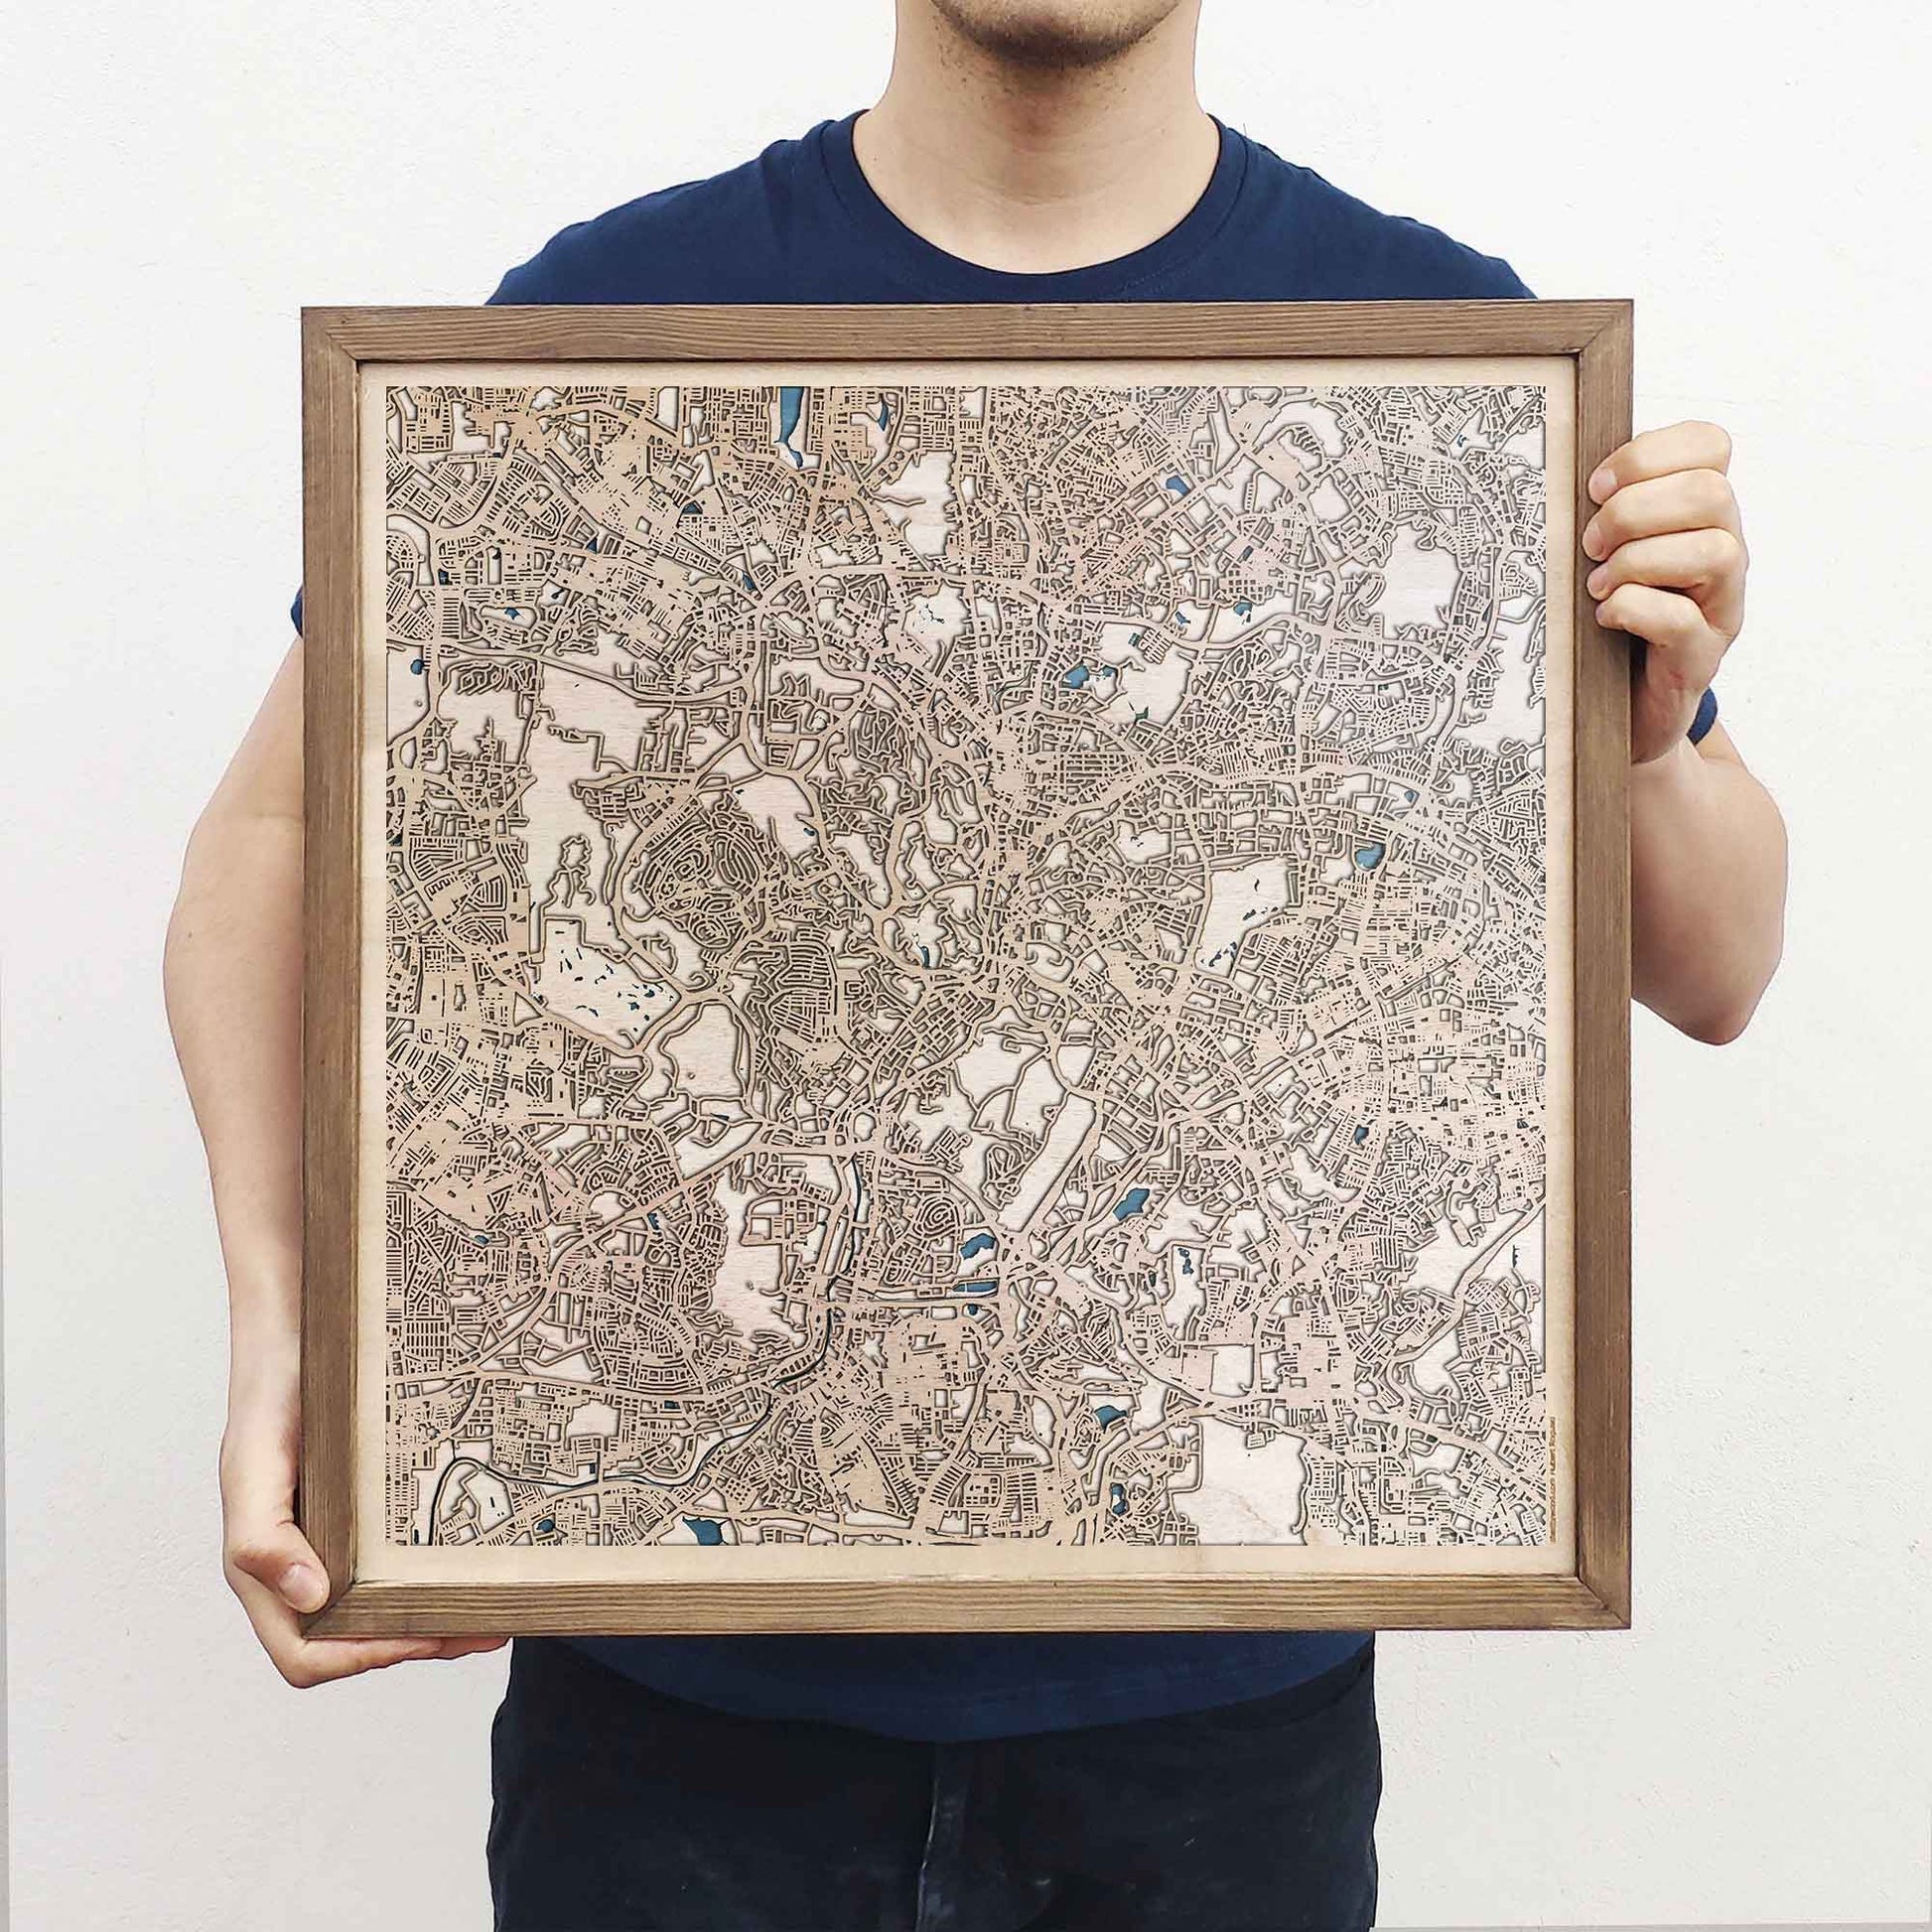 Kuala Lumpur Wooden Map by CityWood - Custom Wood Map Art - Unique Laser Cut Engraved - Anniversary Gift